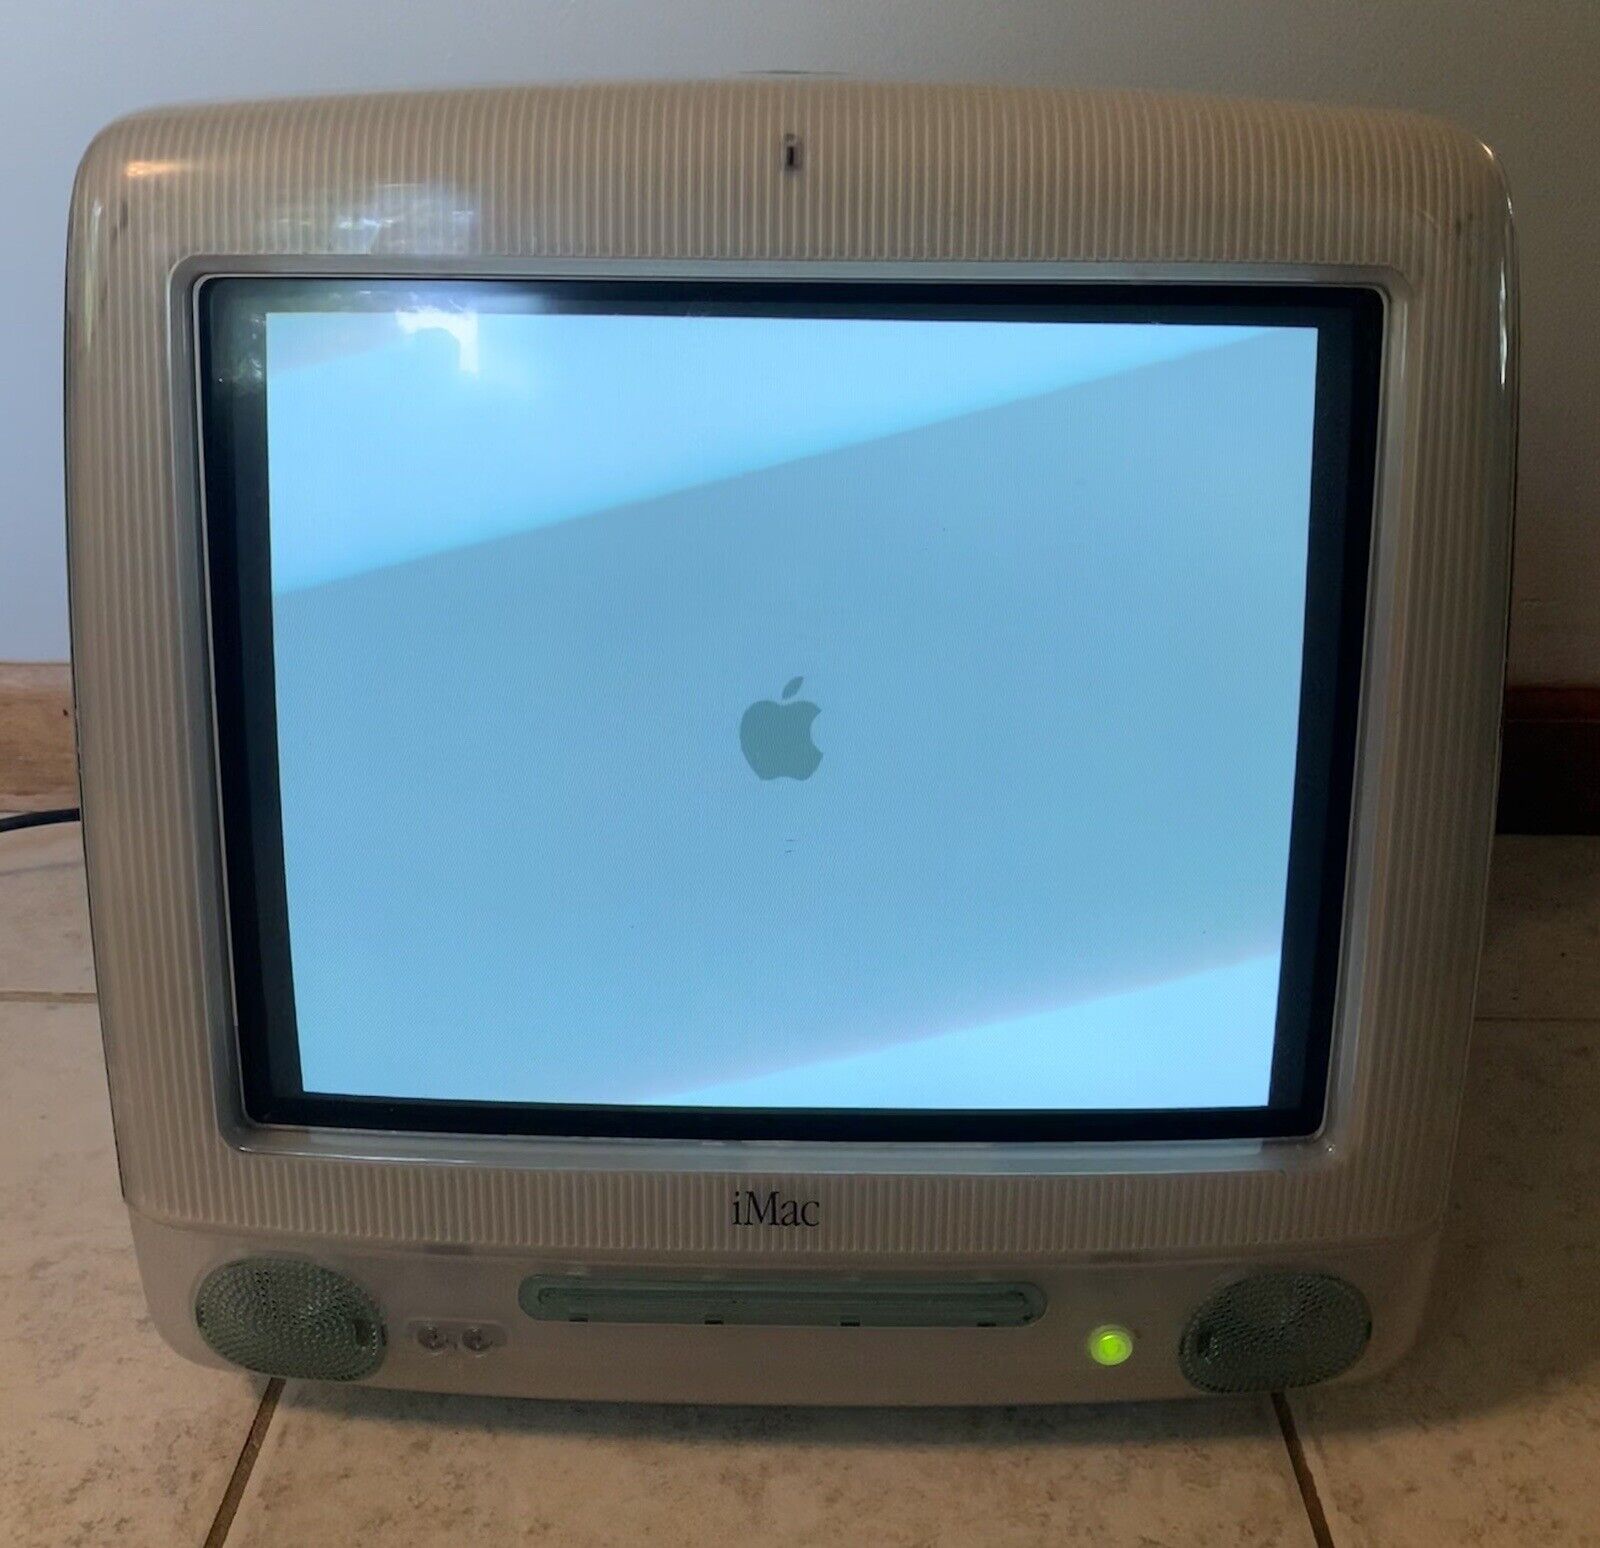 Vintage Apple iMac G3 Blue Blueberry M5521 450MHZ 20GB 128MB Ram Tested Working